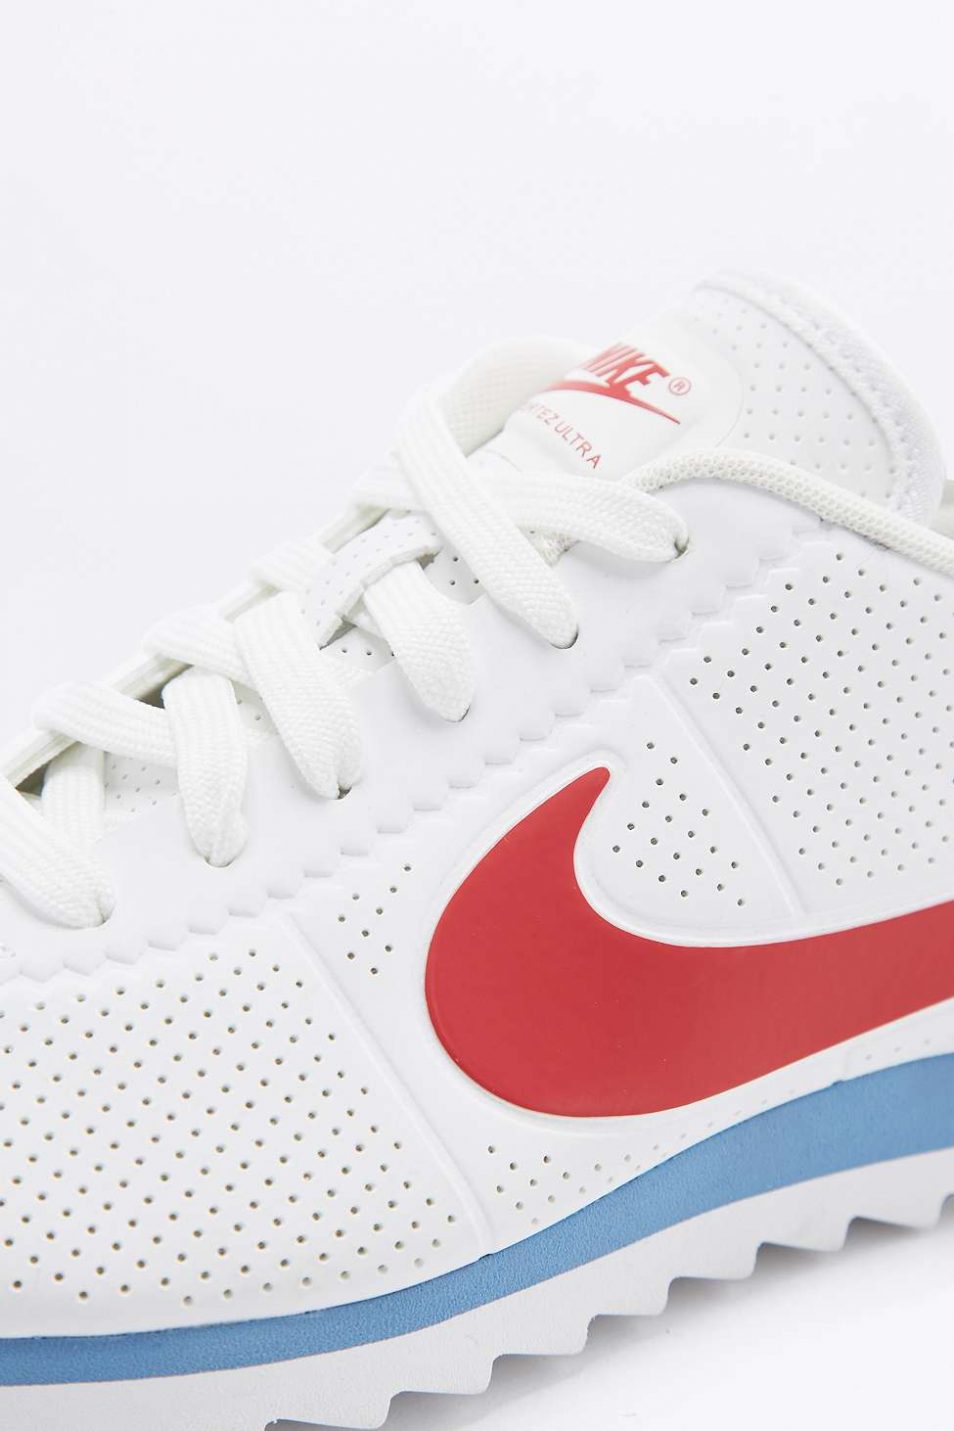 Nike Cortez Ultra Red, White, and Blue Sneakers - 95Gallery.com